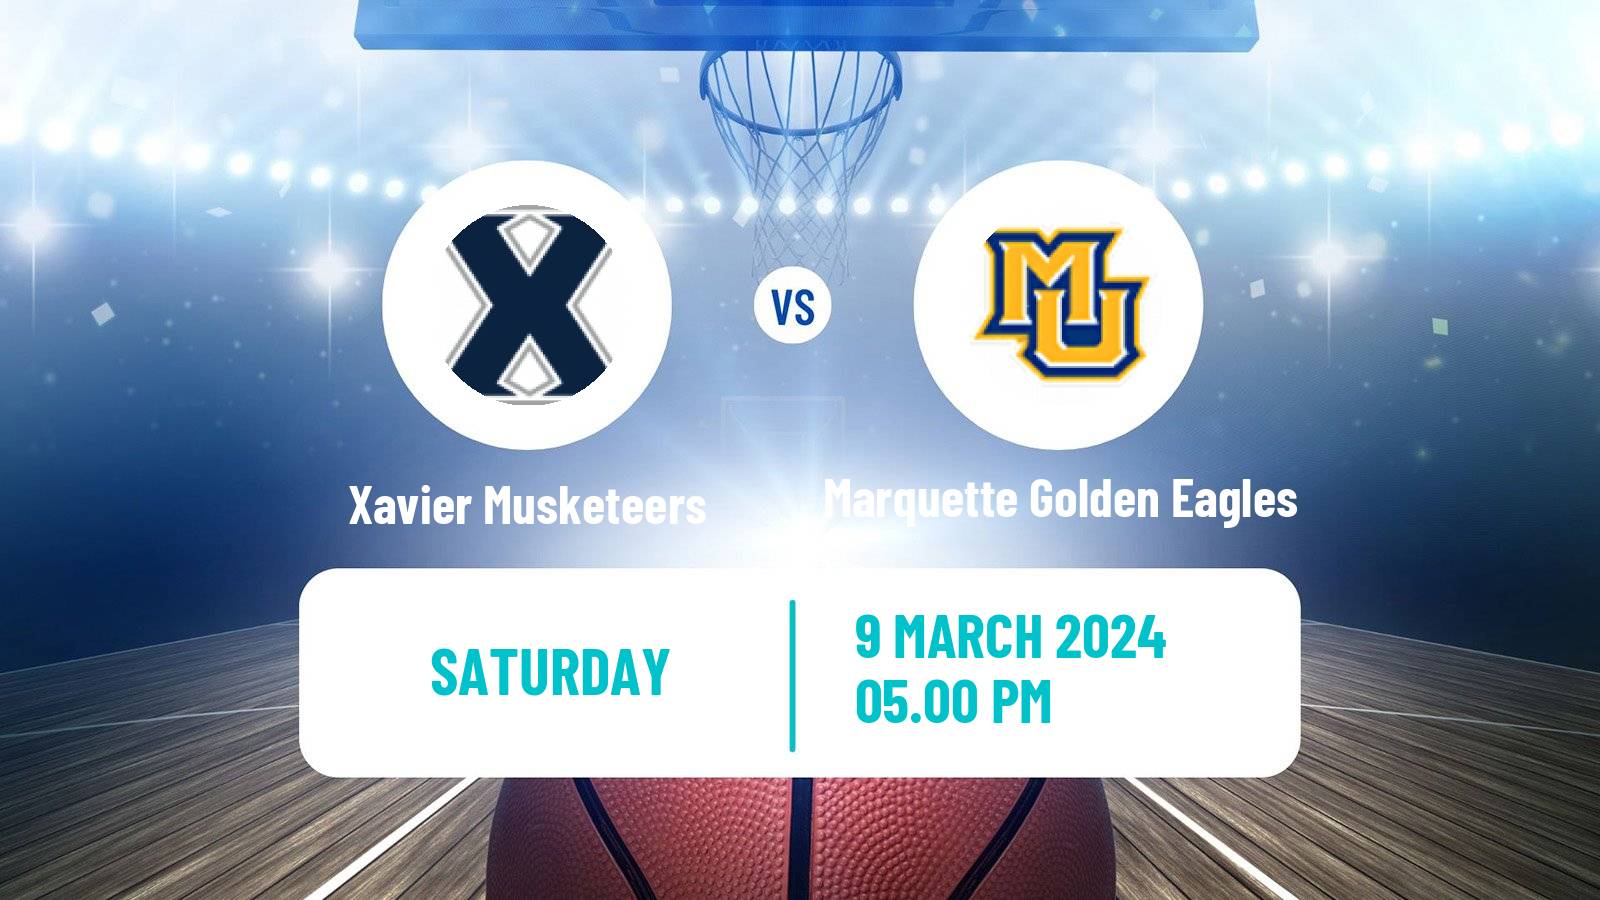 Basketball NCAA College Basketball Xavier Musketeers - Marquette Golden Eagles